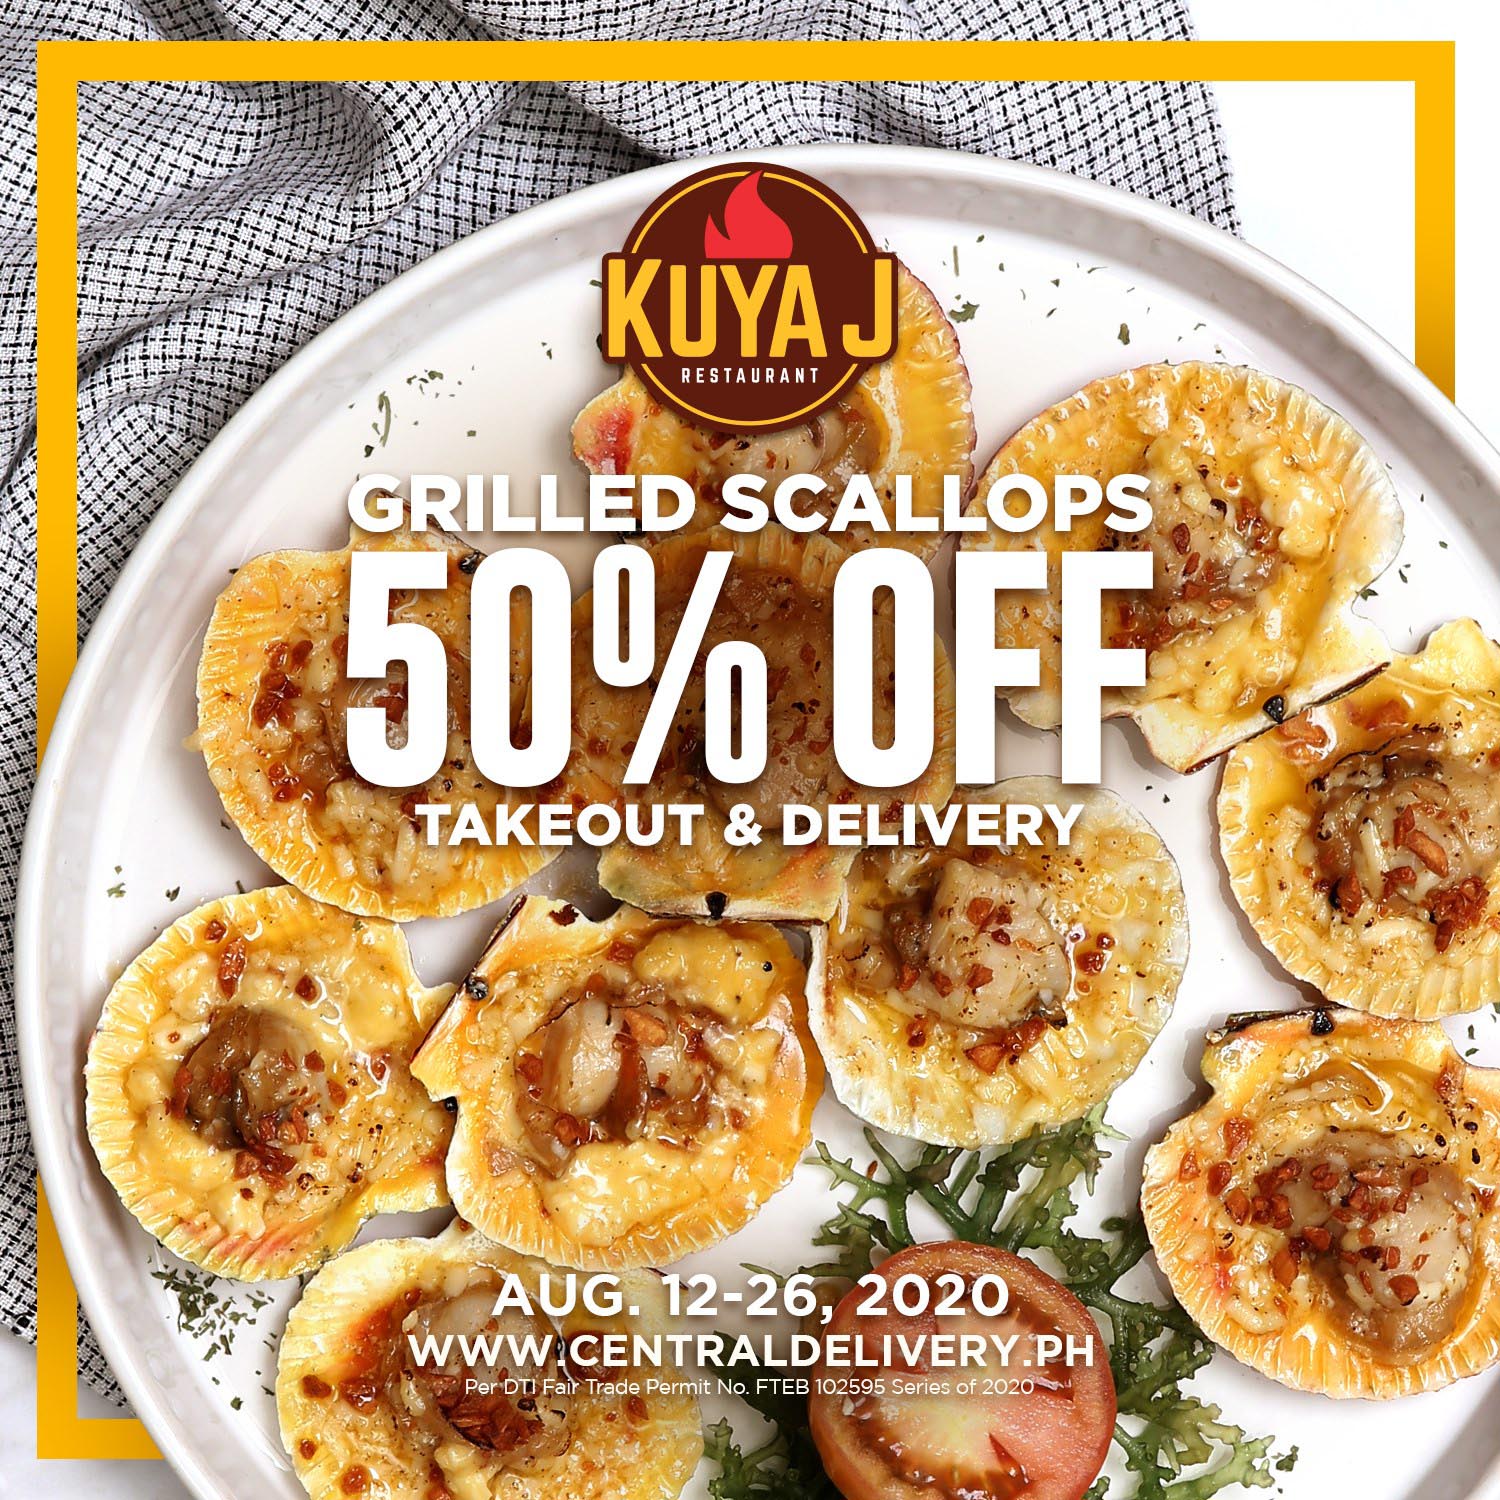 Get 50% off on Kuya J Grilled Scallops